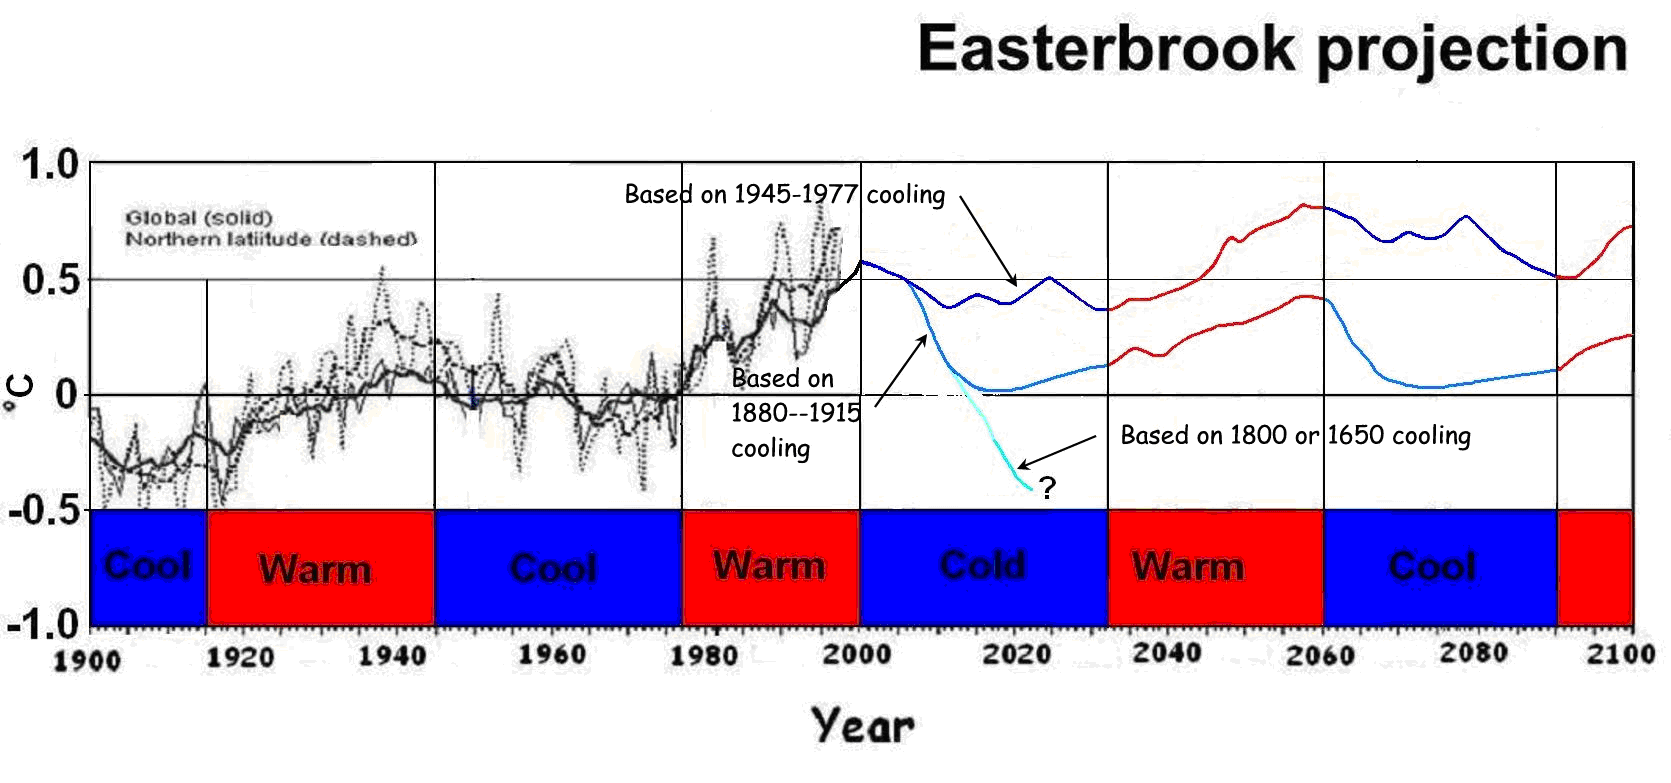 Easterbrook global cooling projection